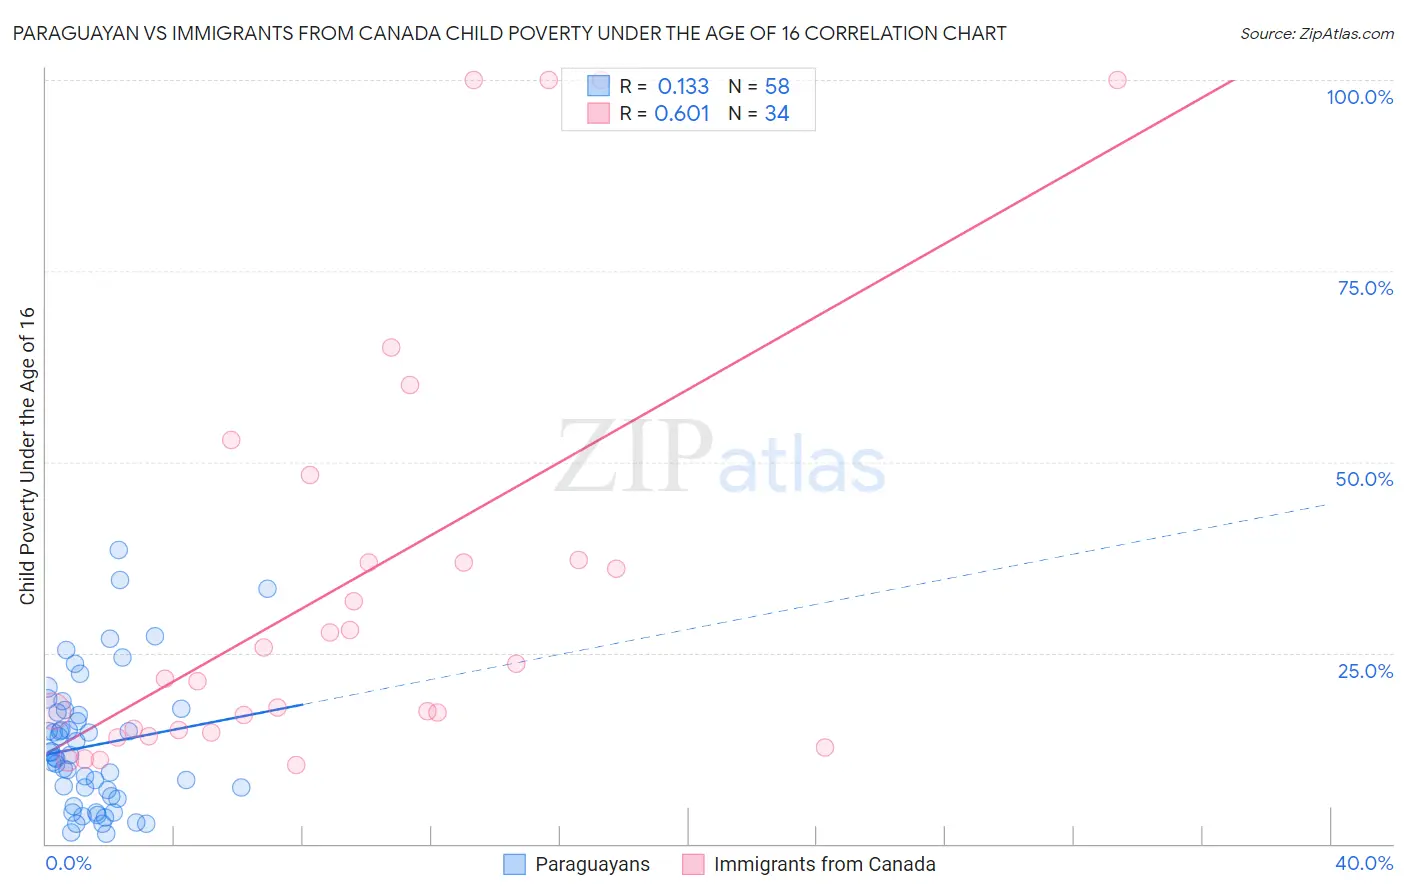 Paraguayan vs Immigrants from Canada Child Poverty Under the Age of 16